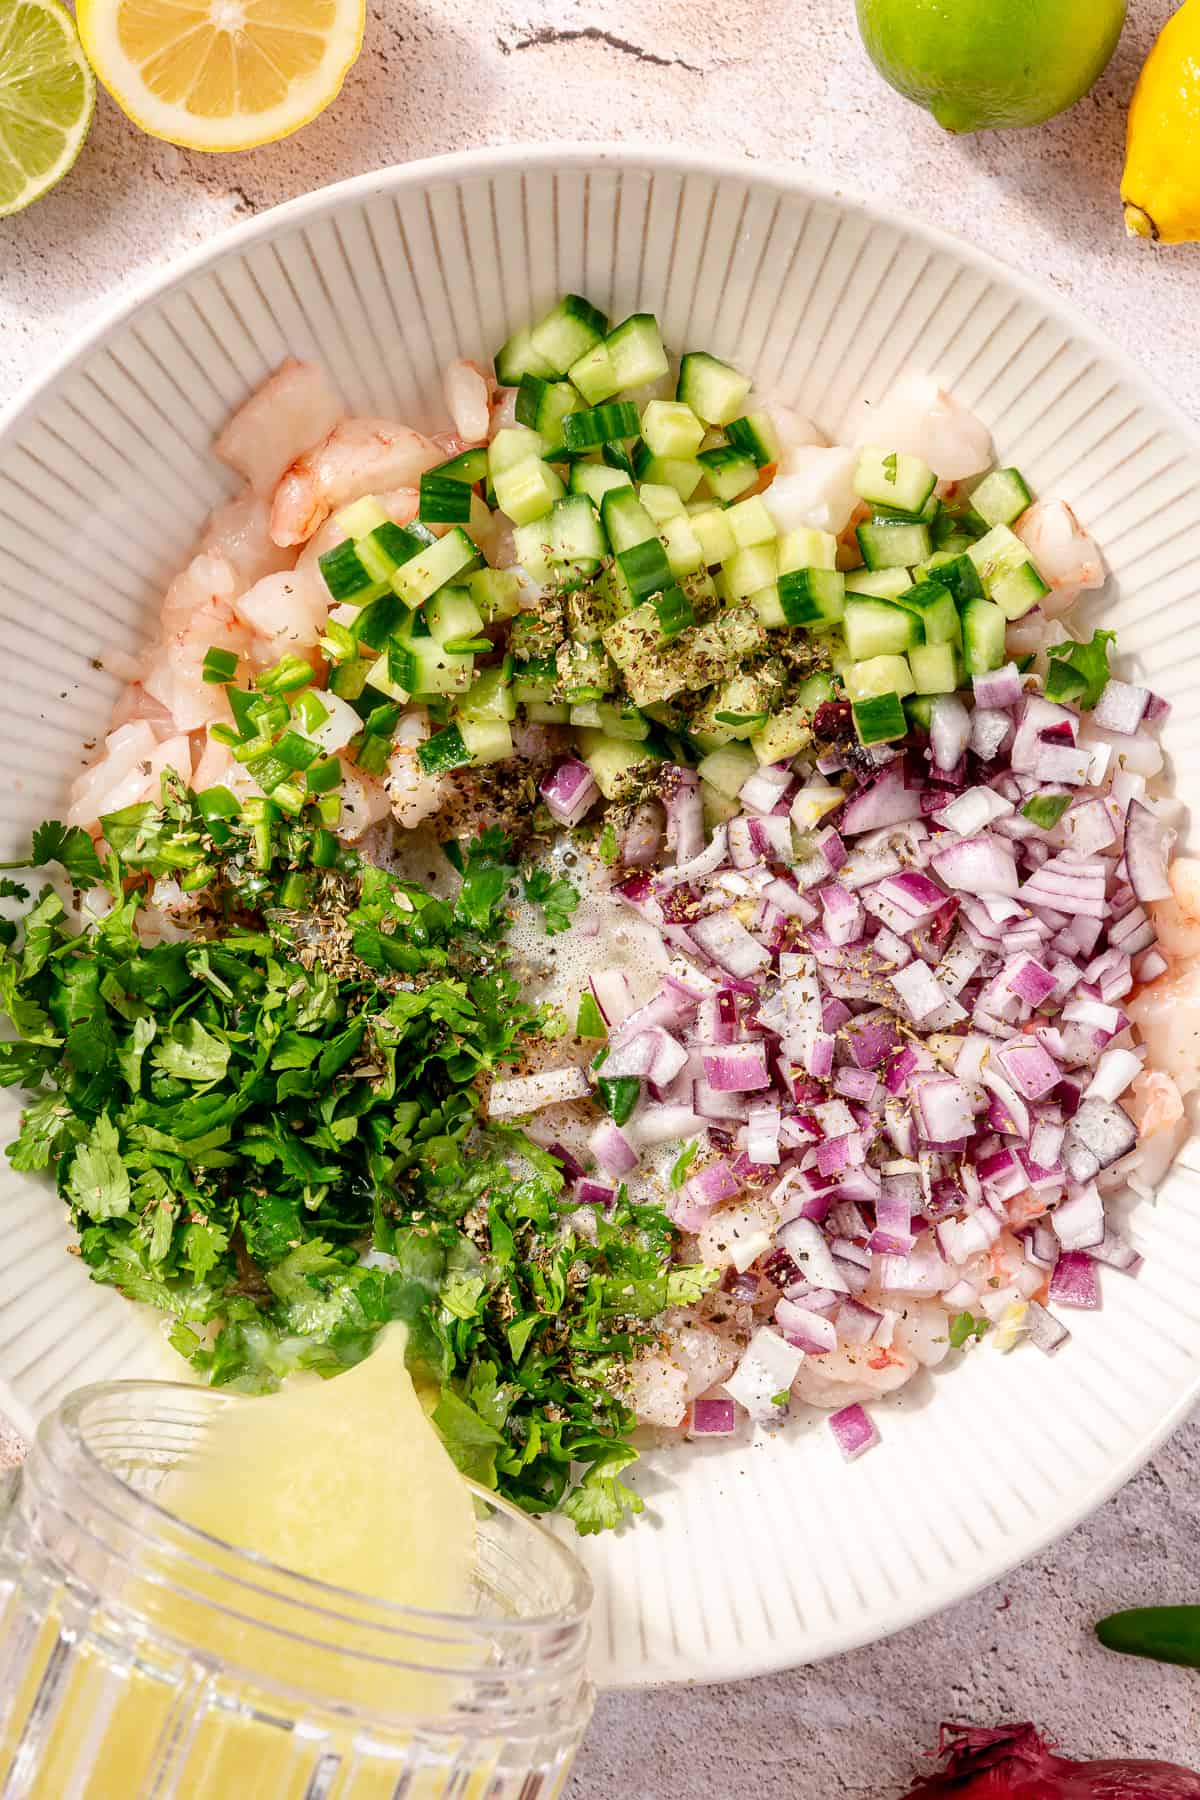 Shrimp Ceviche ingredients in large bowl before it is mixed.